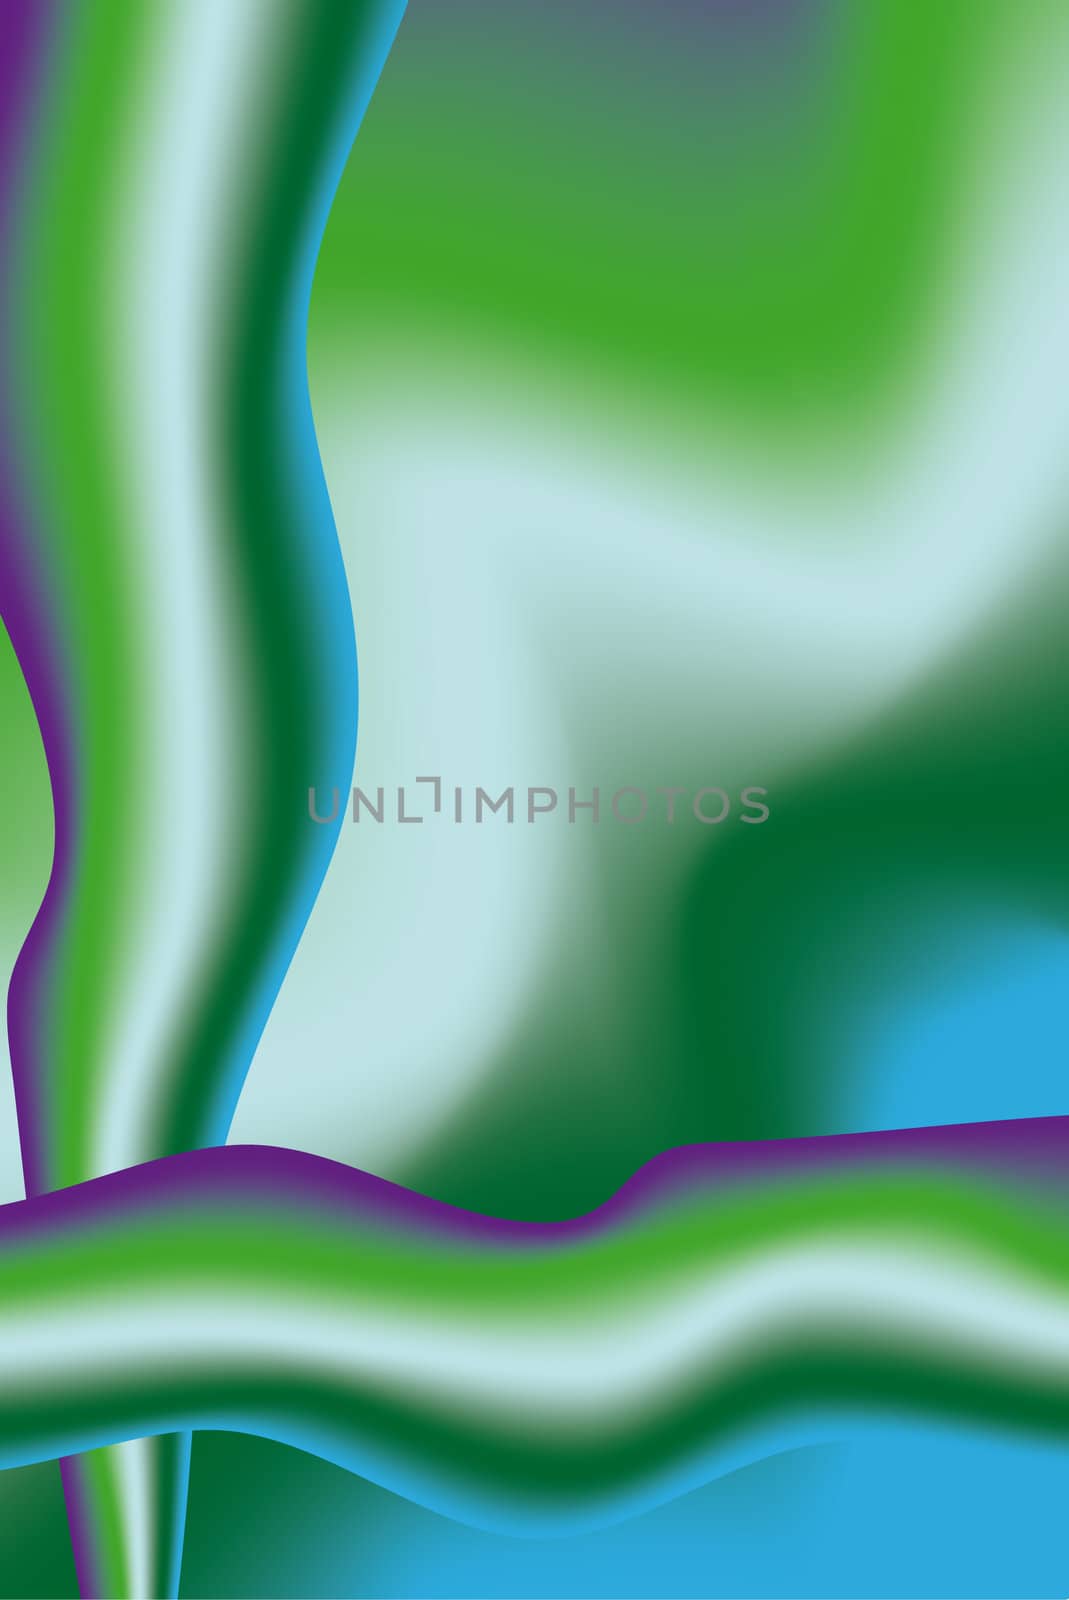 modern wavy background in white green blue and purple
